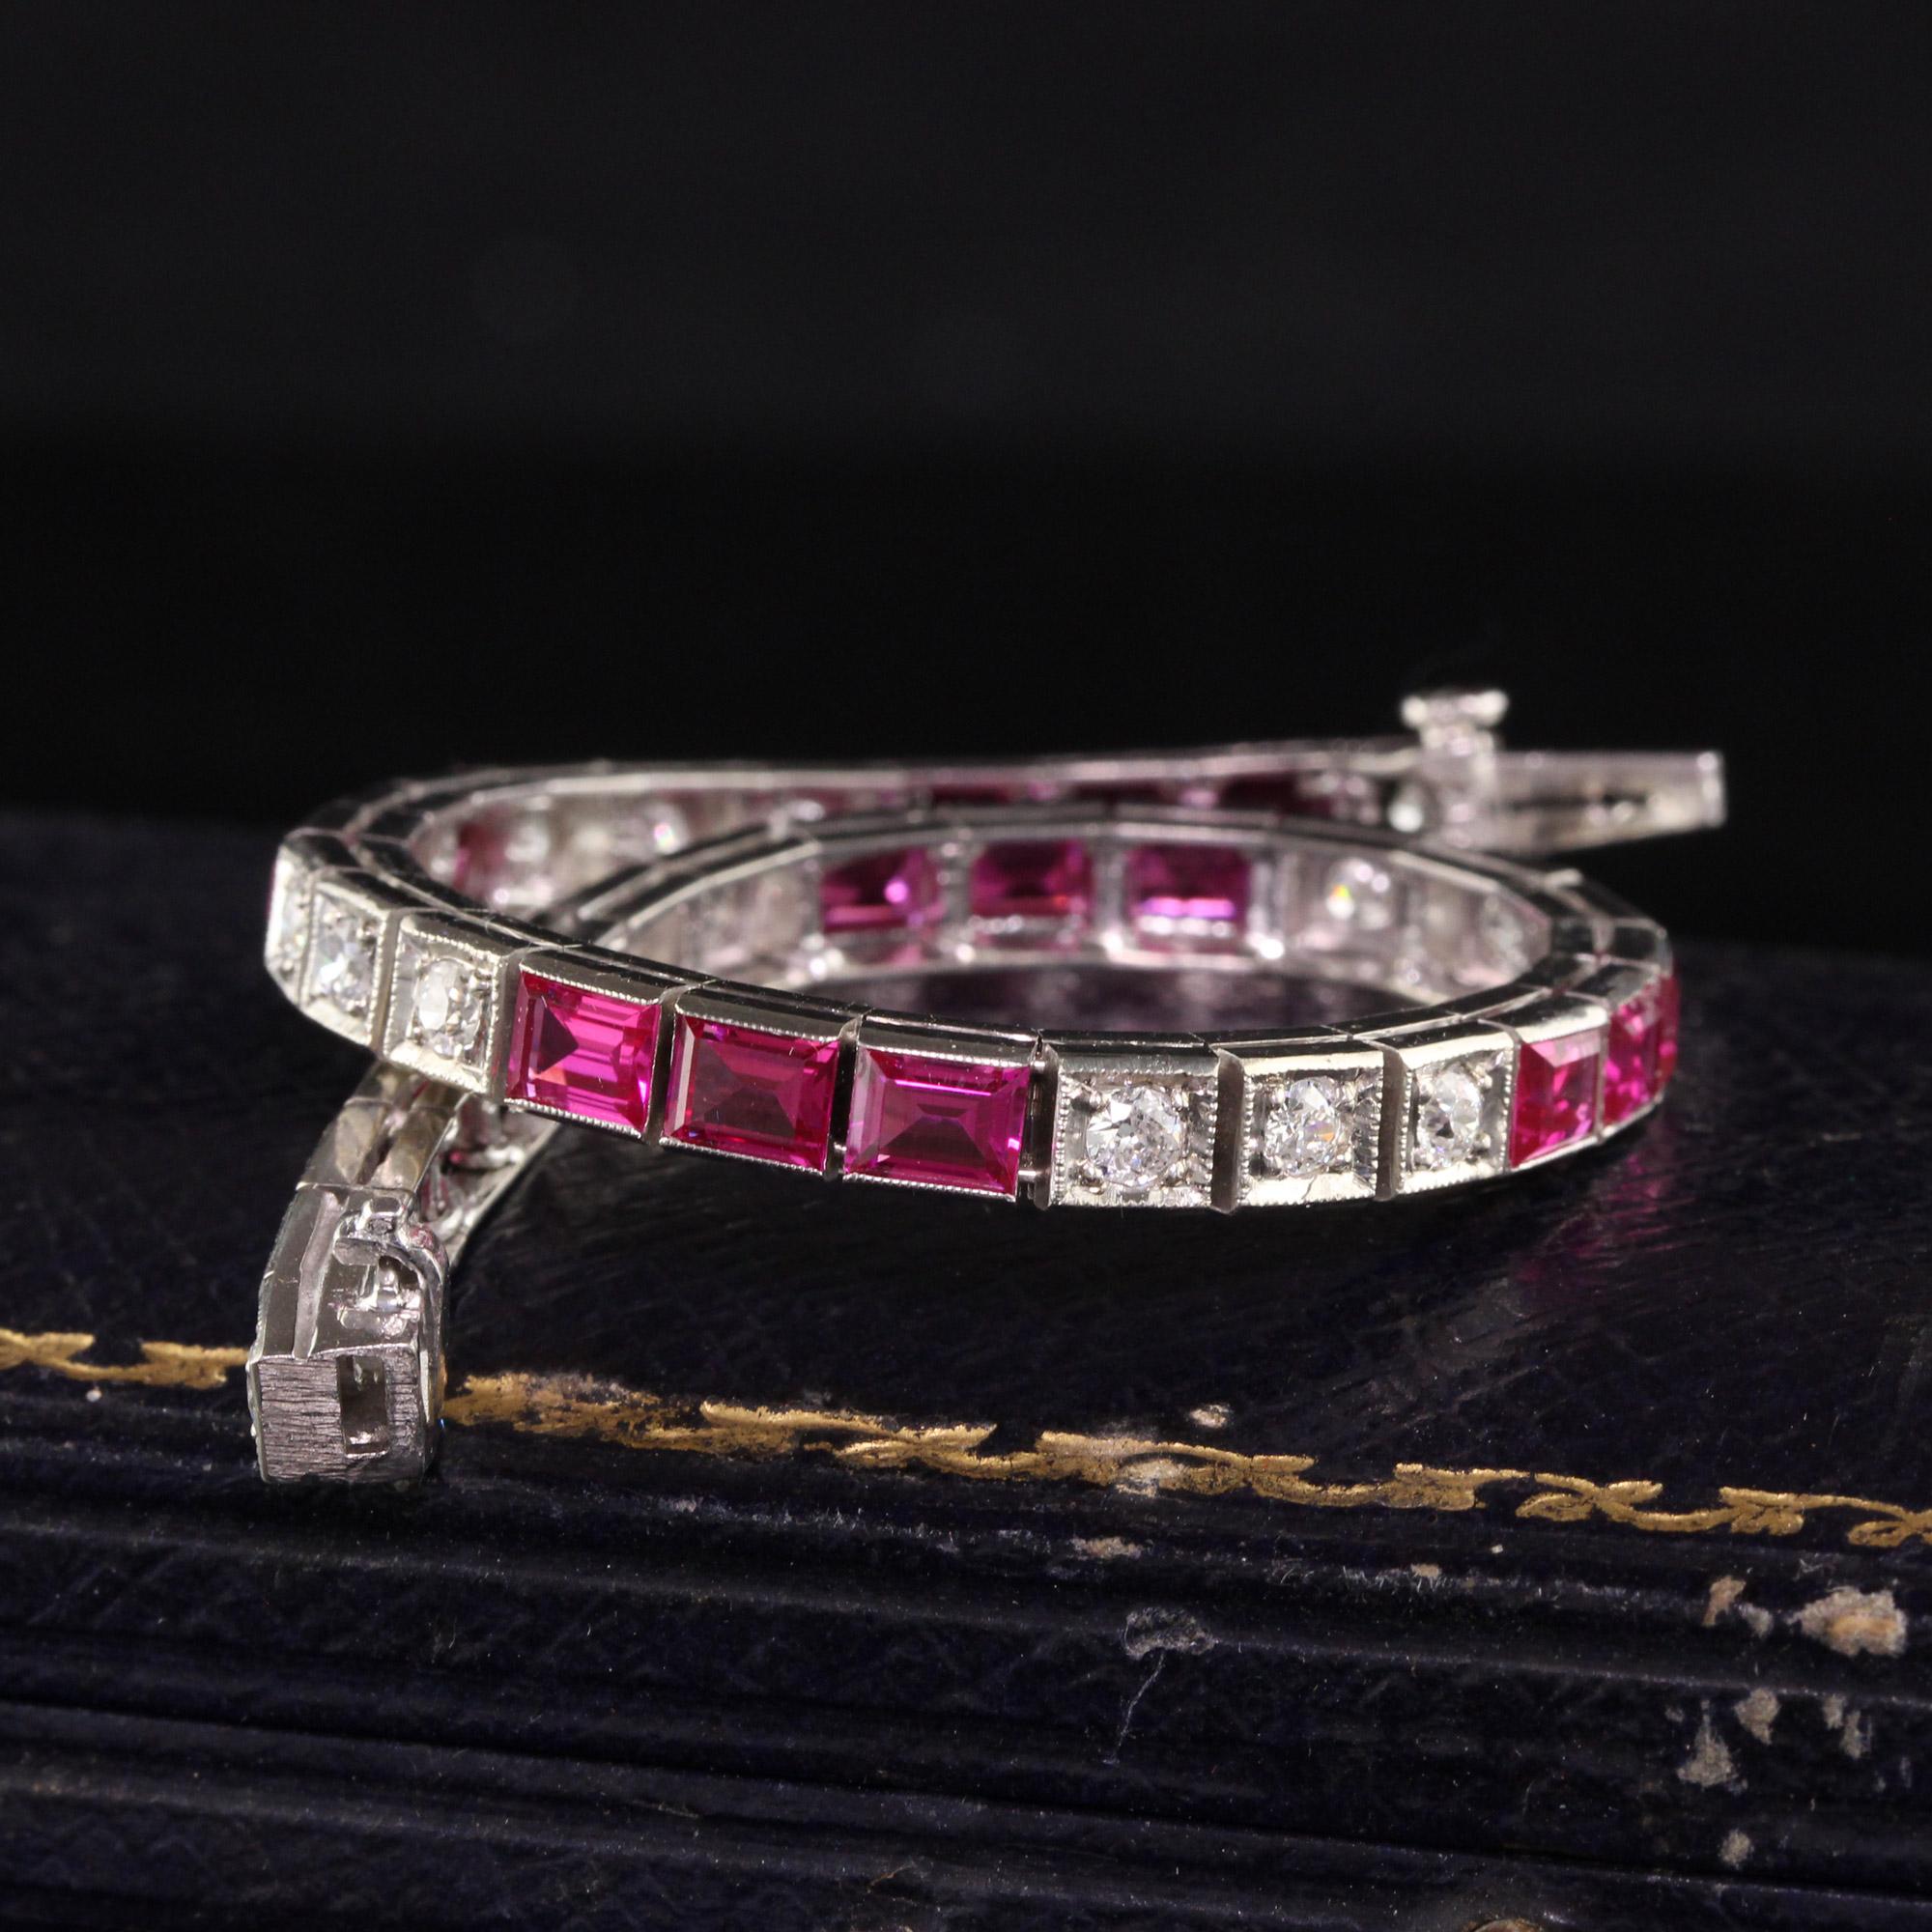 Beautiful Antique Art Deco 14K White Gold Old European Cut Diamond and Ruby Line Bracelet. This gorgeous bracelet has old european cut diamonds and synthetic rubies going across the bracelet. The synthetic rubies are very bright and two of them are